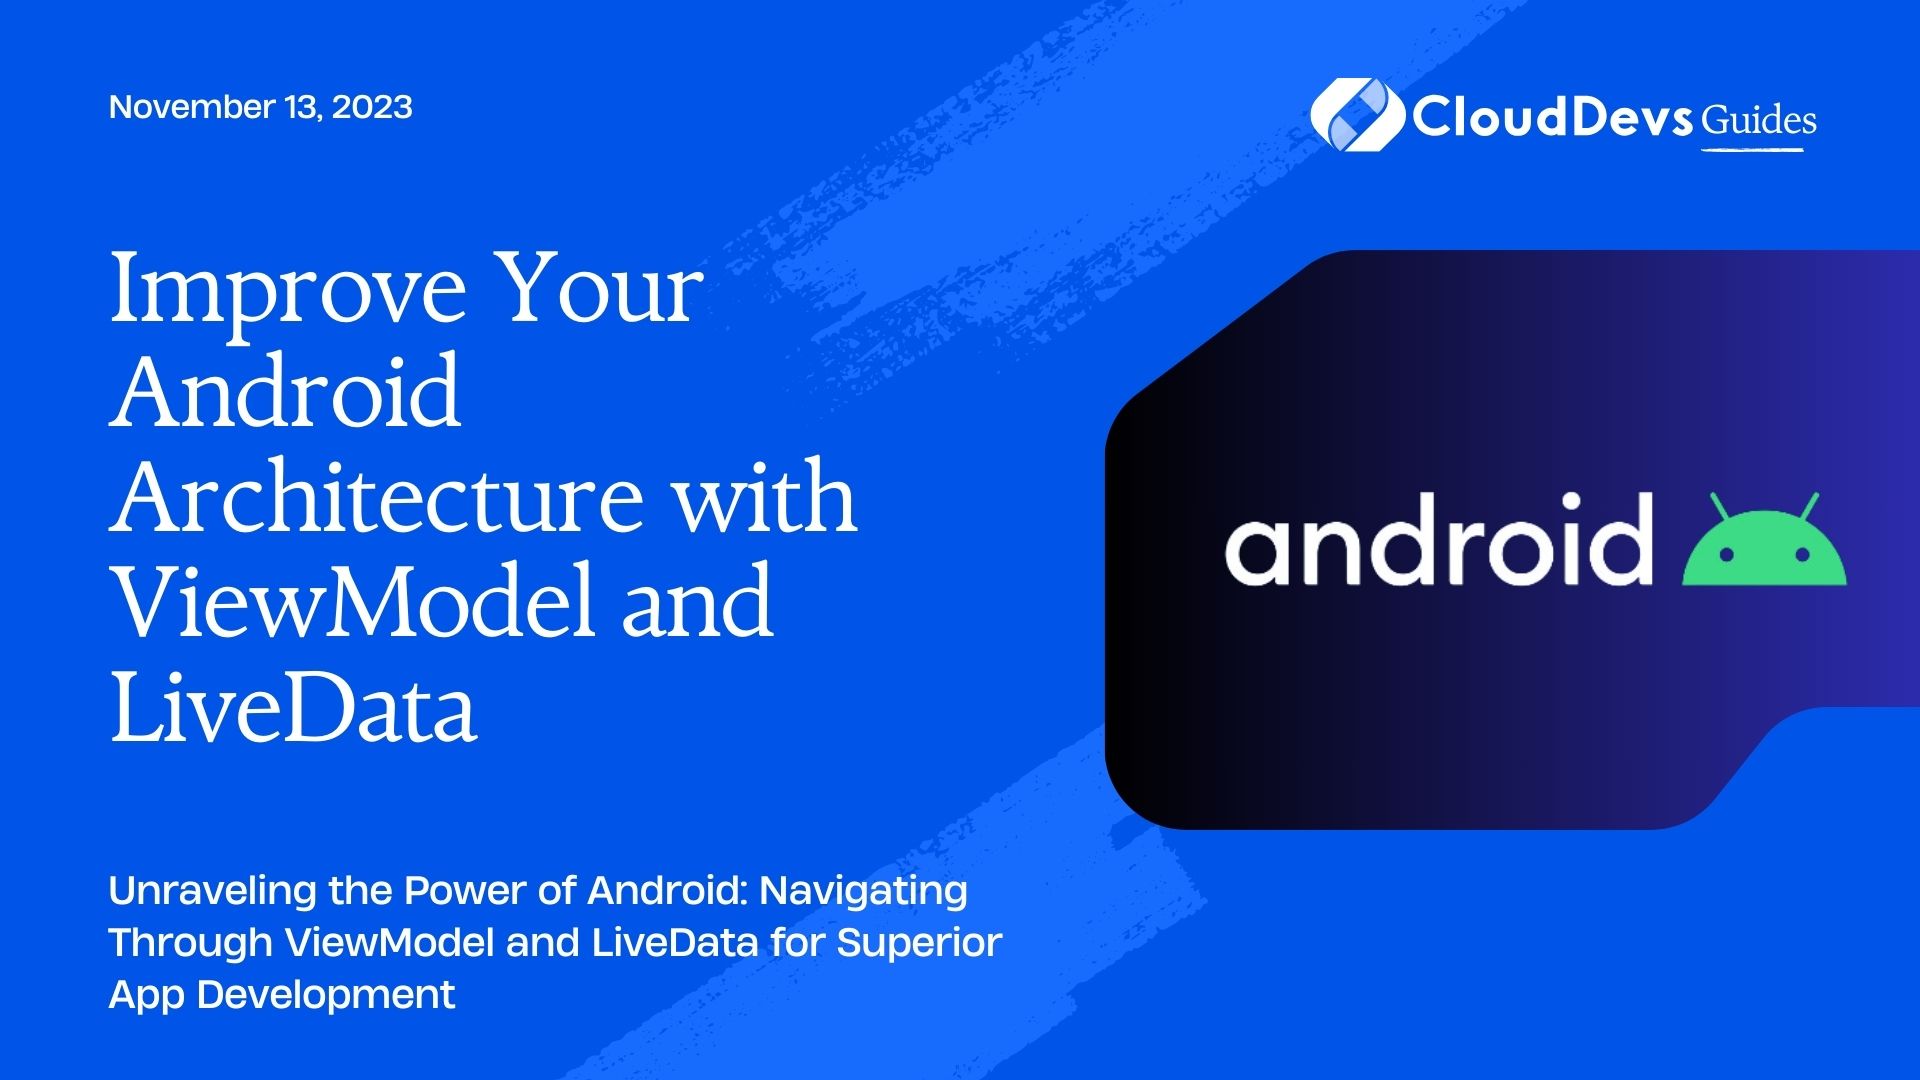 Improve Your Android Architecture with ViewModel and LiveData